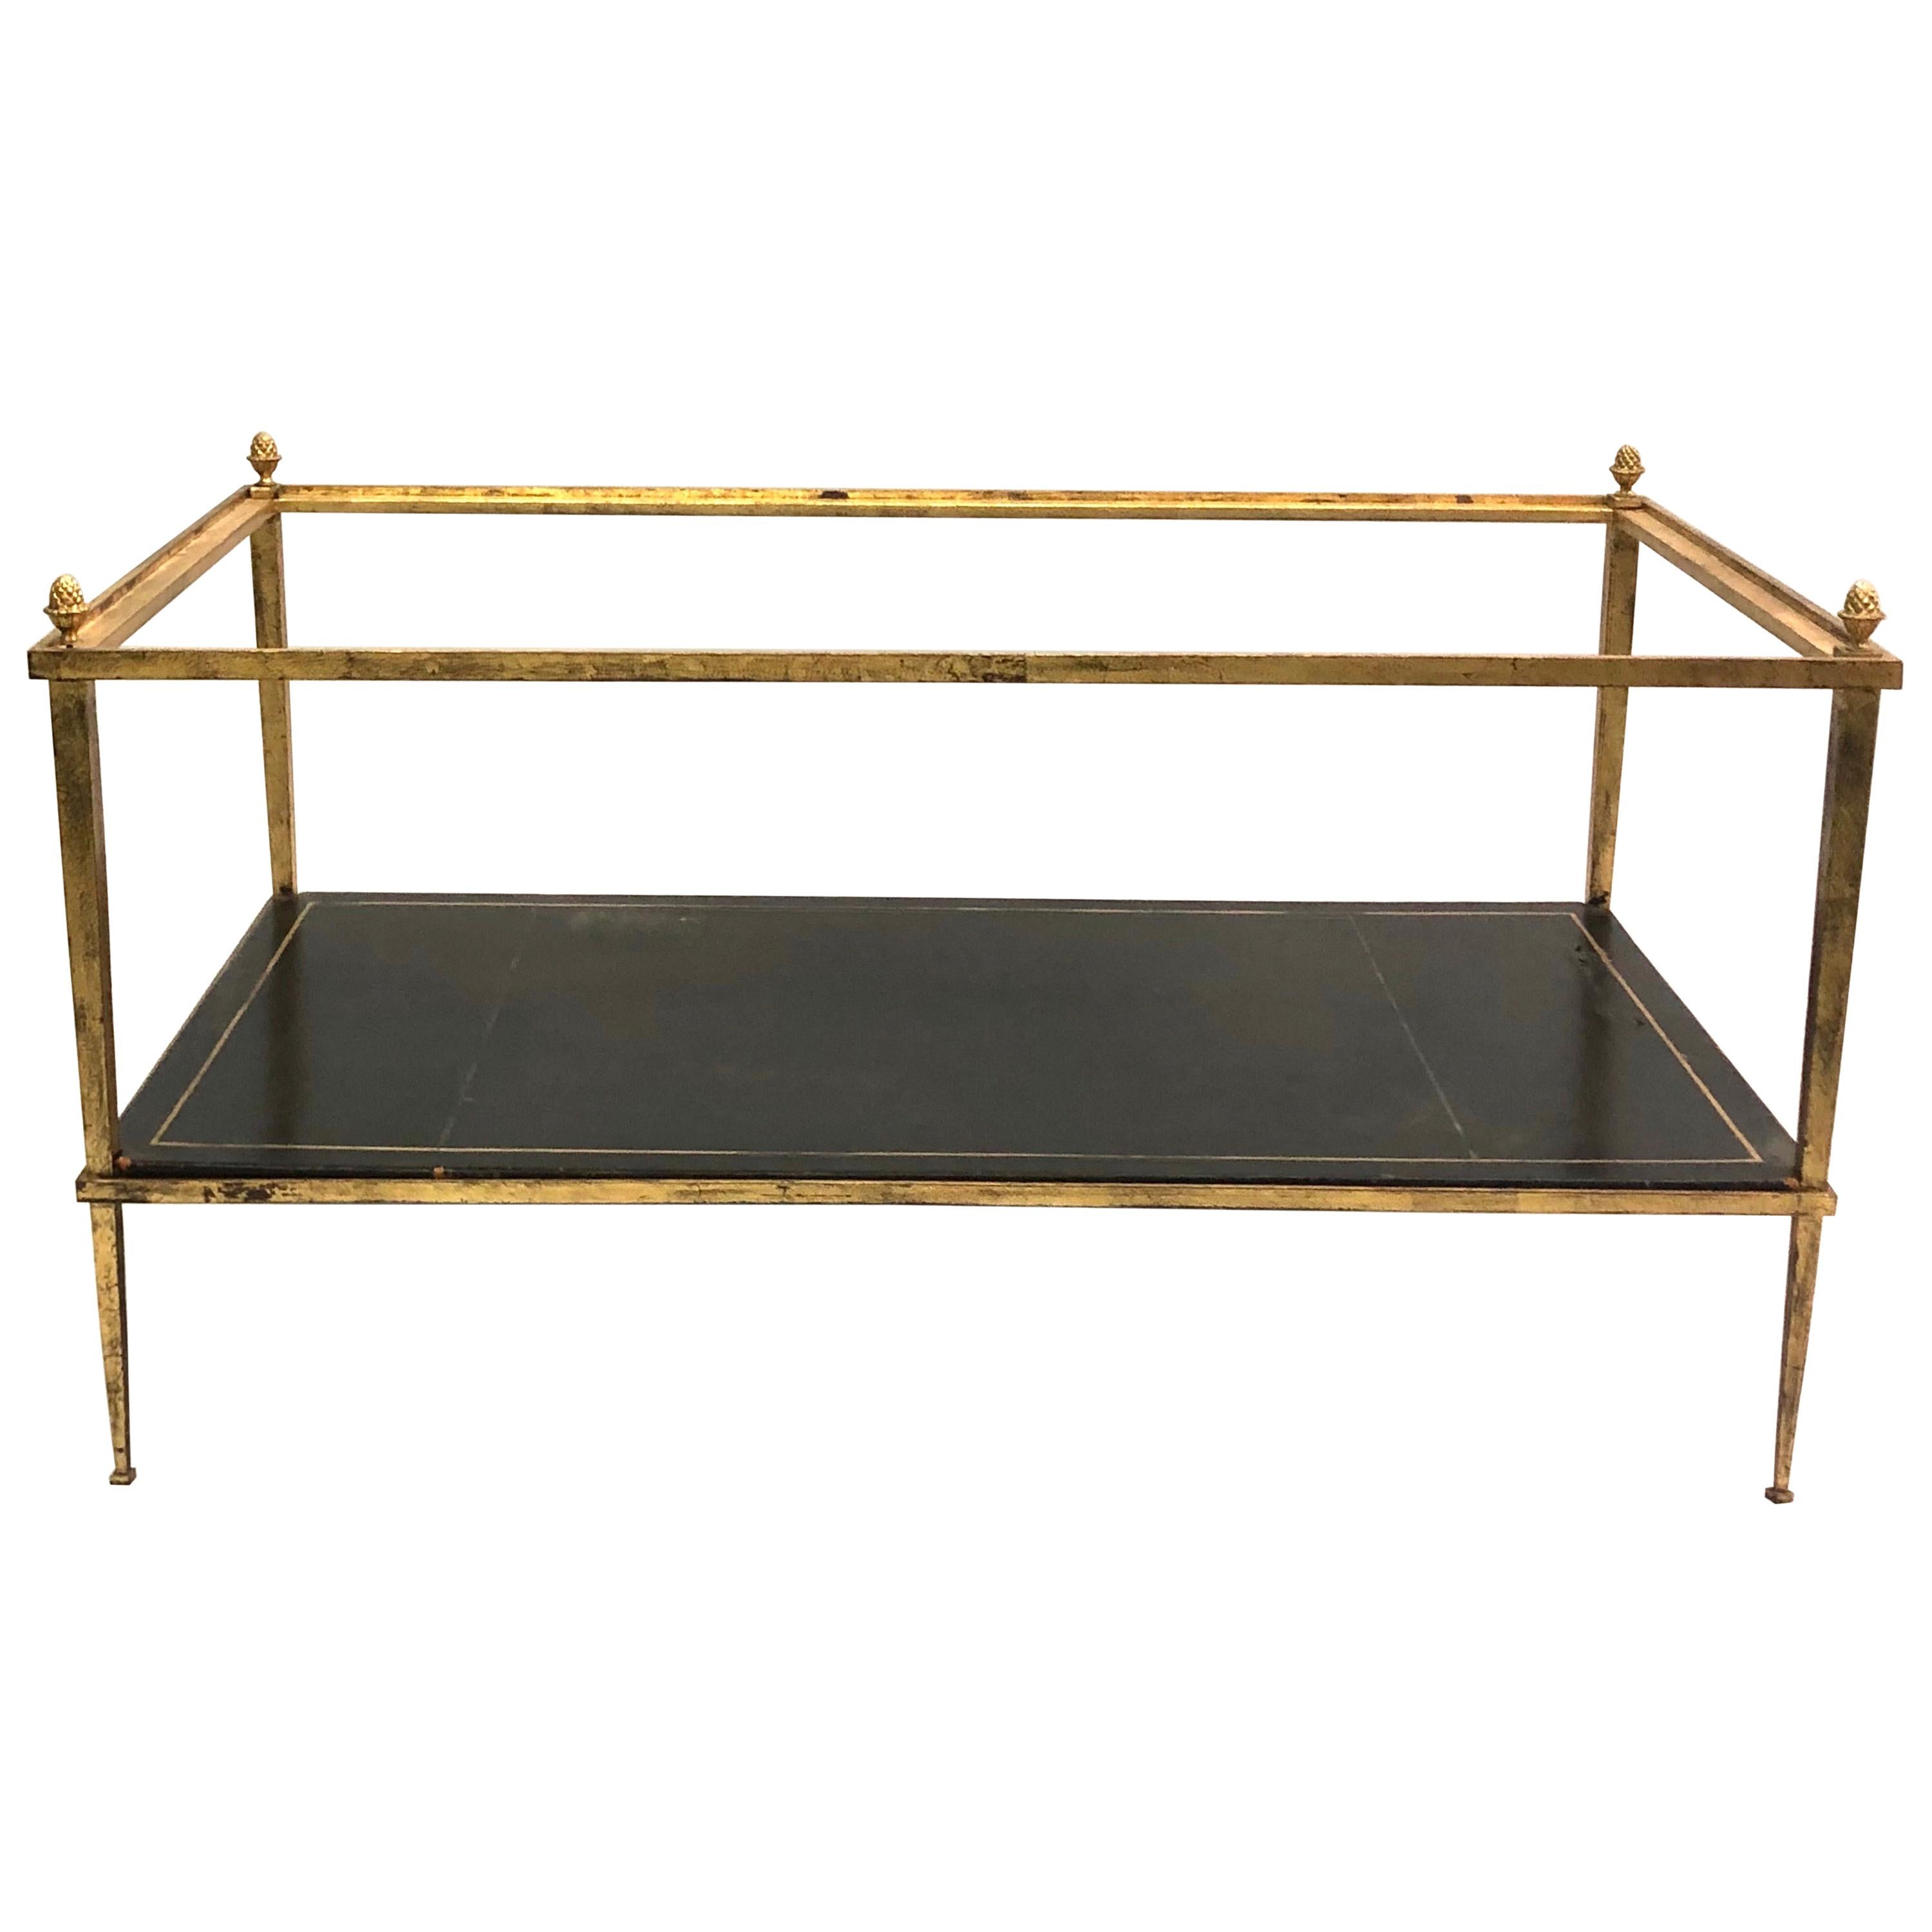 French Gilt Iron and Leather Modern Neoclassical Cocktail Table by Maison Ramsay